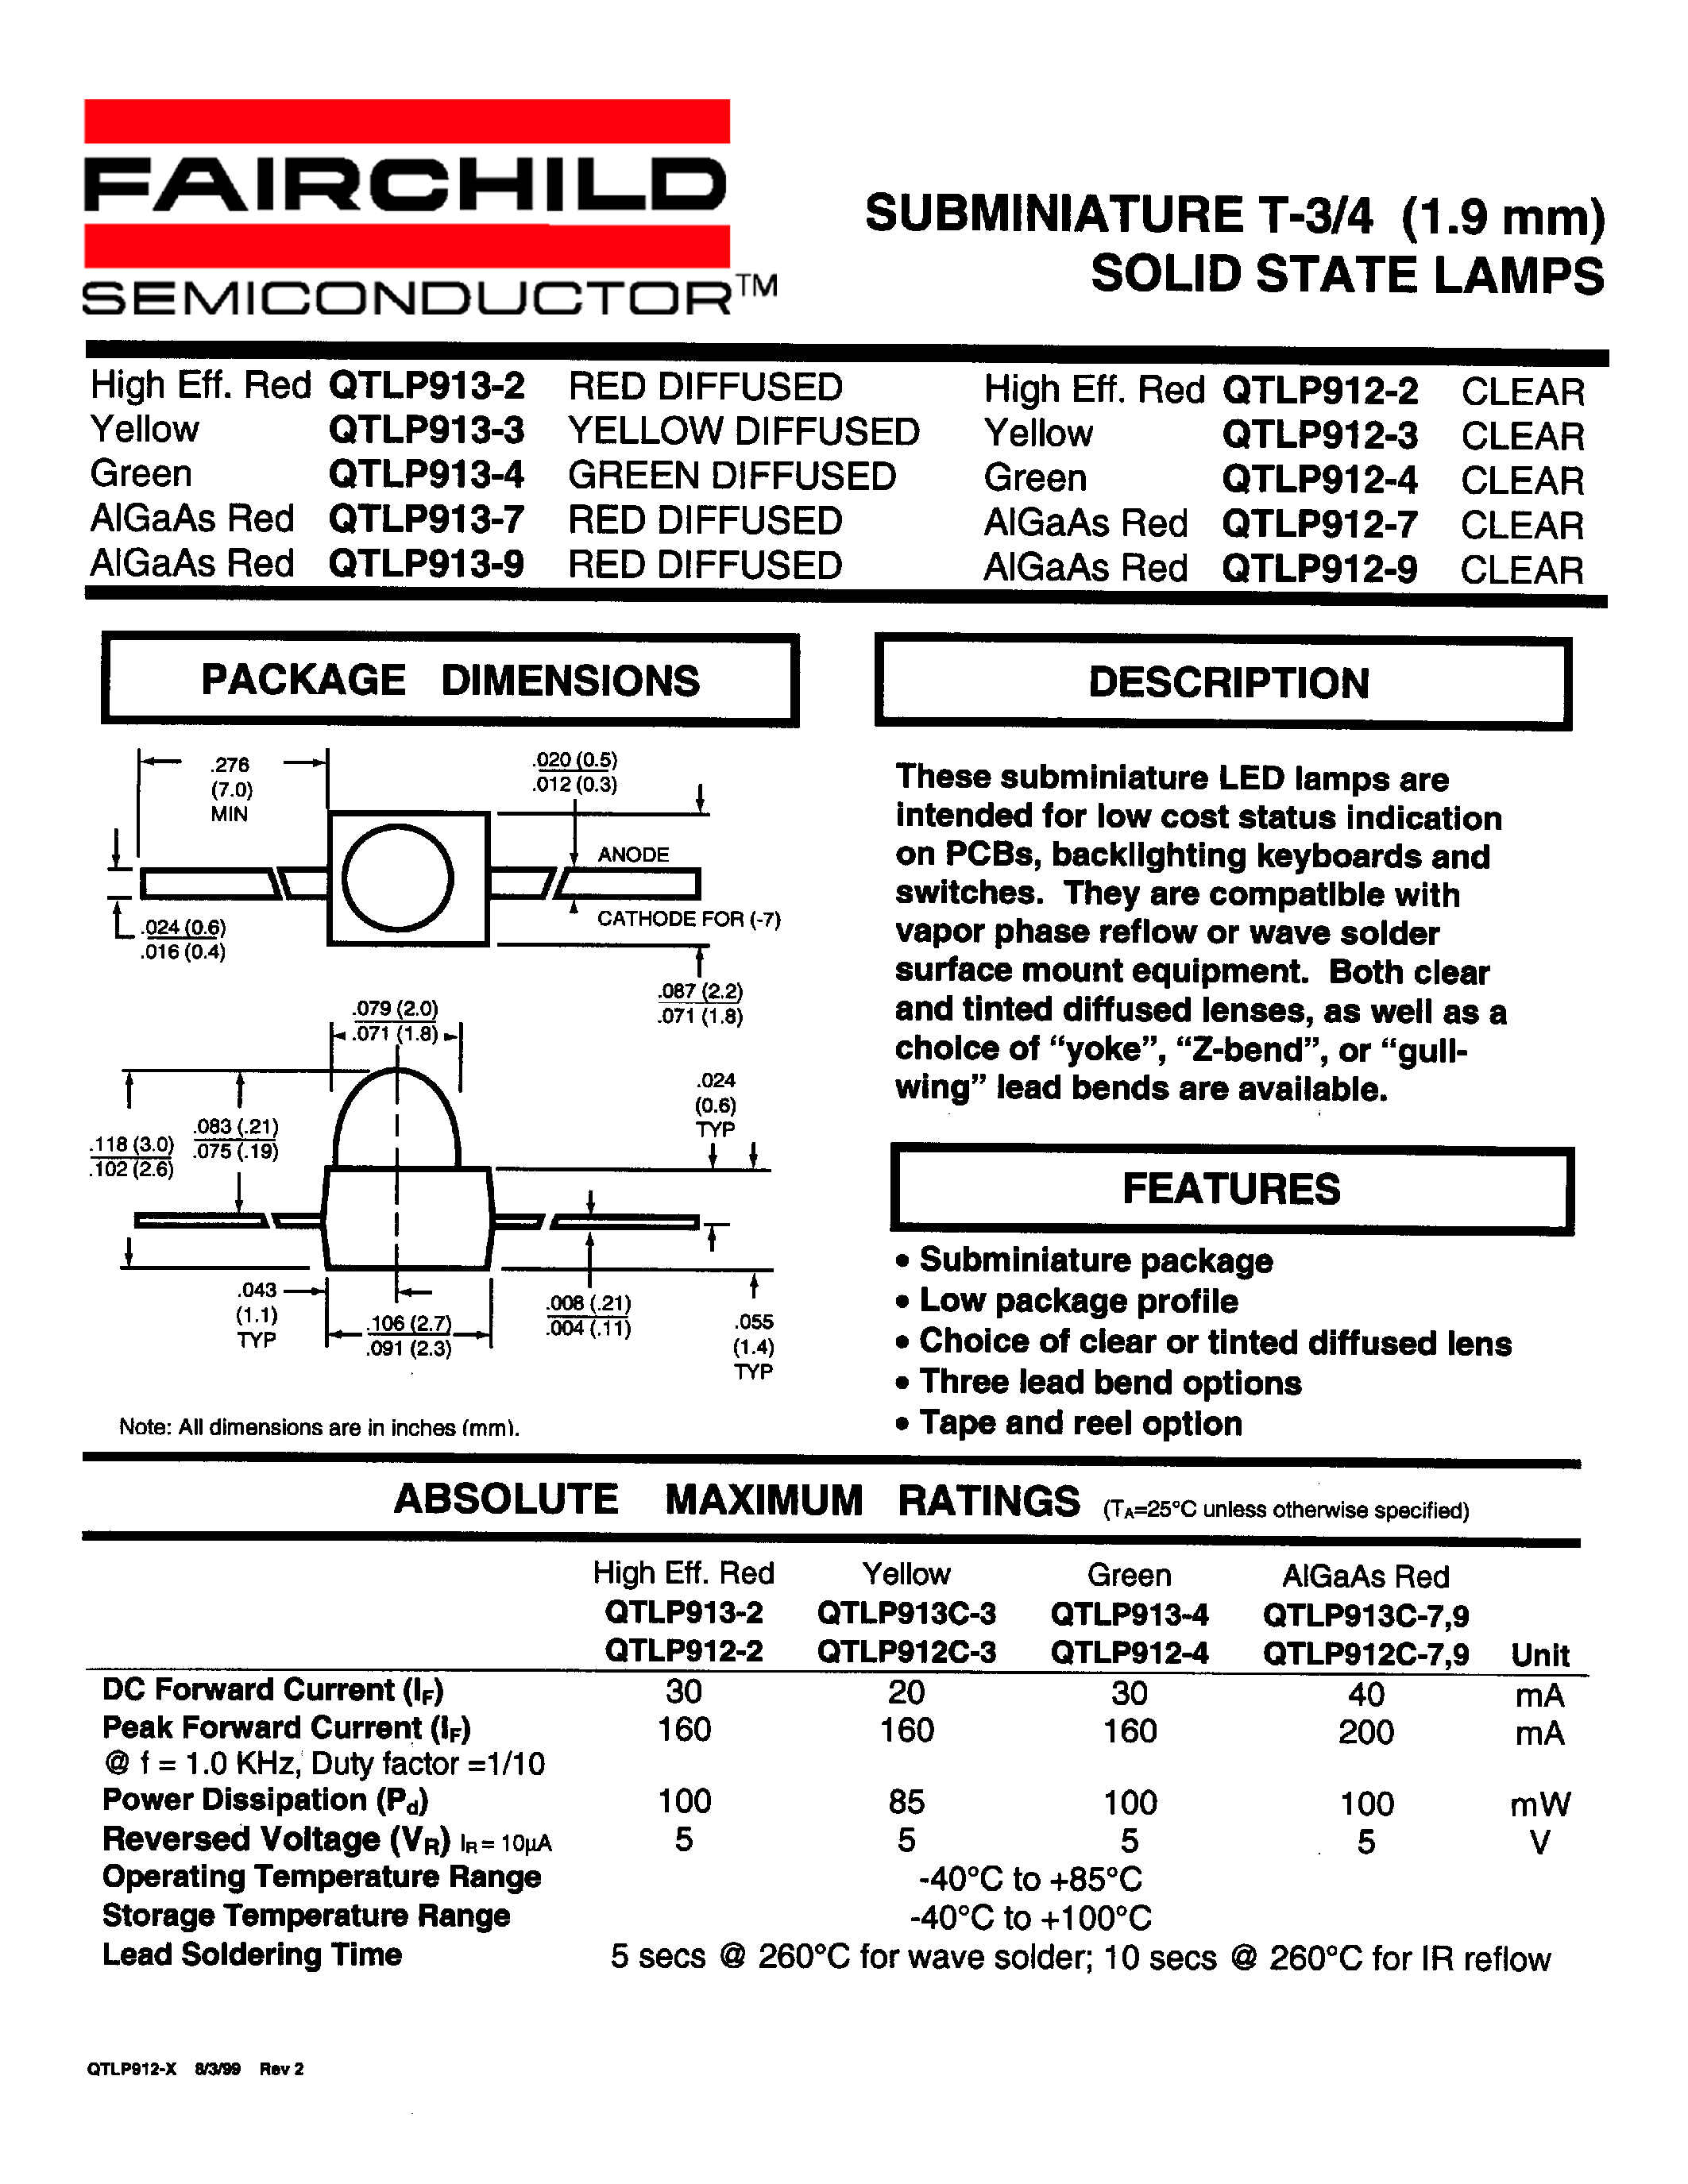 Даташит QTLP913-4-SUBMINIATURE T-3/4 (1.9 mm) SOLID STATE LAMPS страница 1